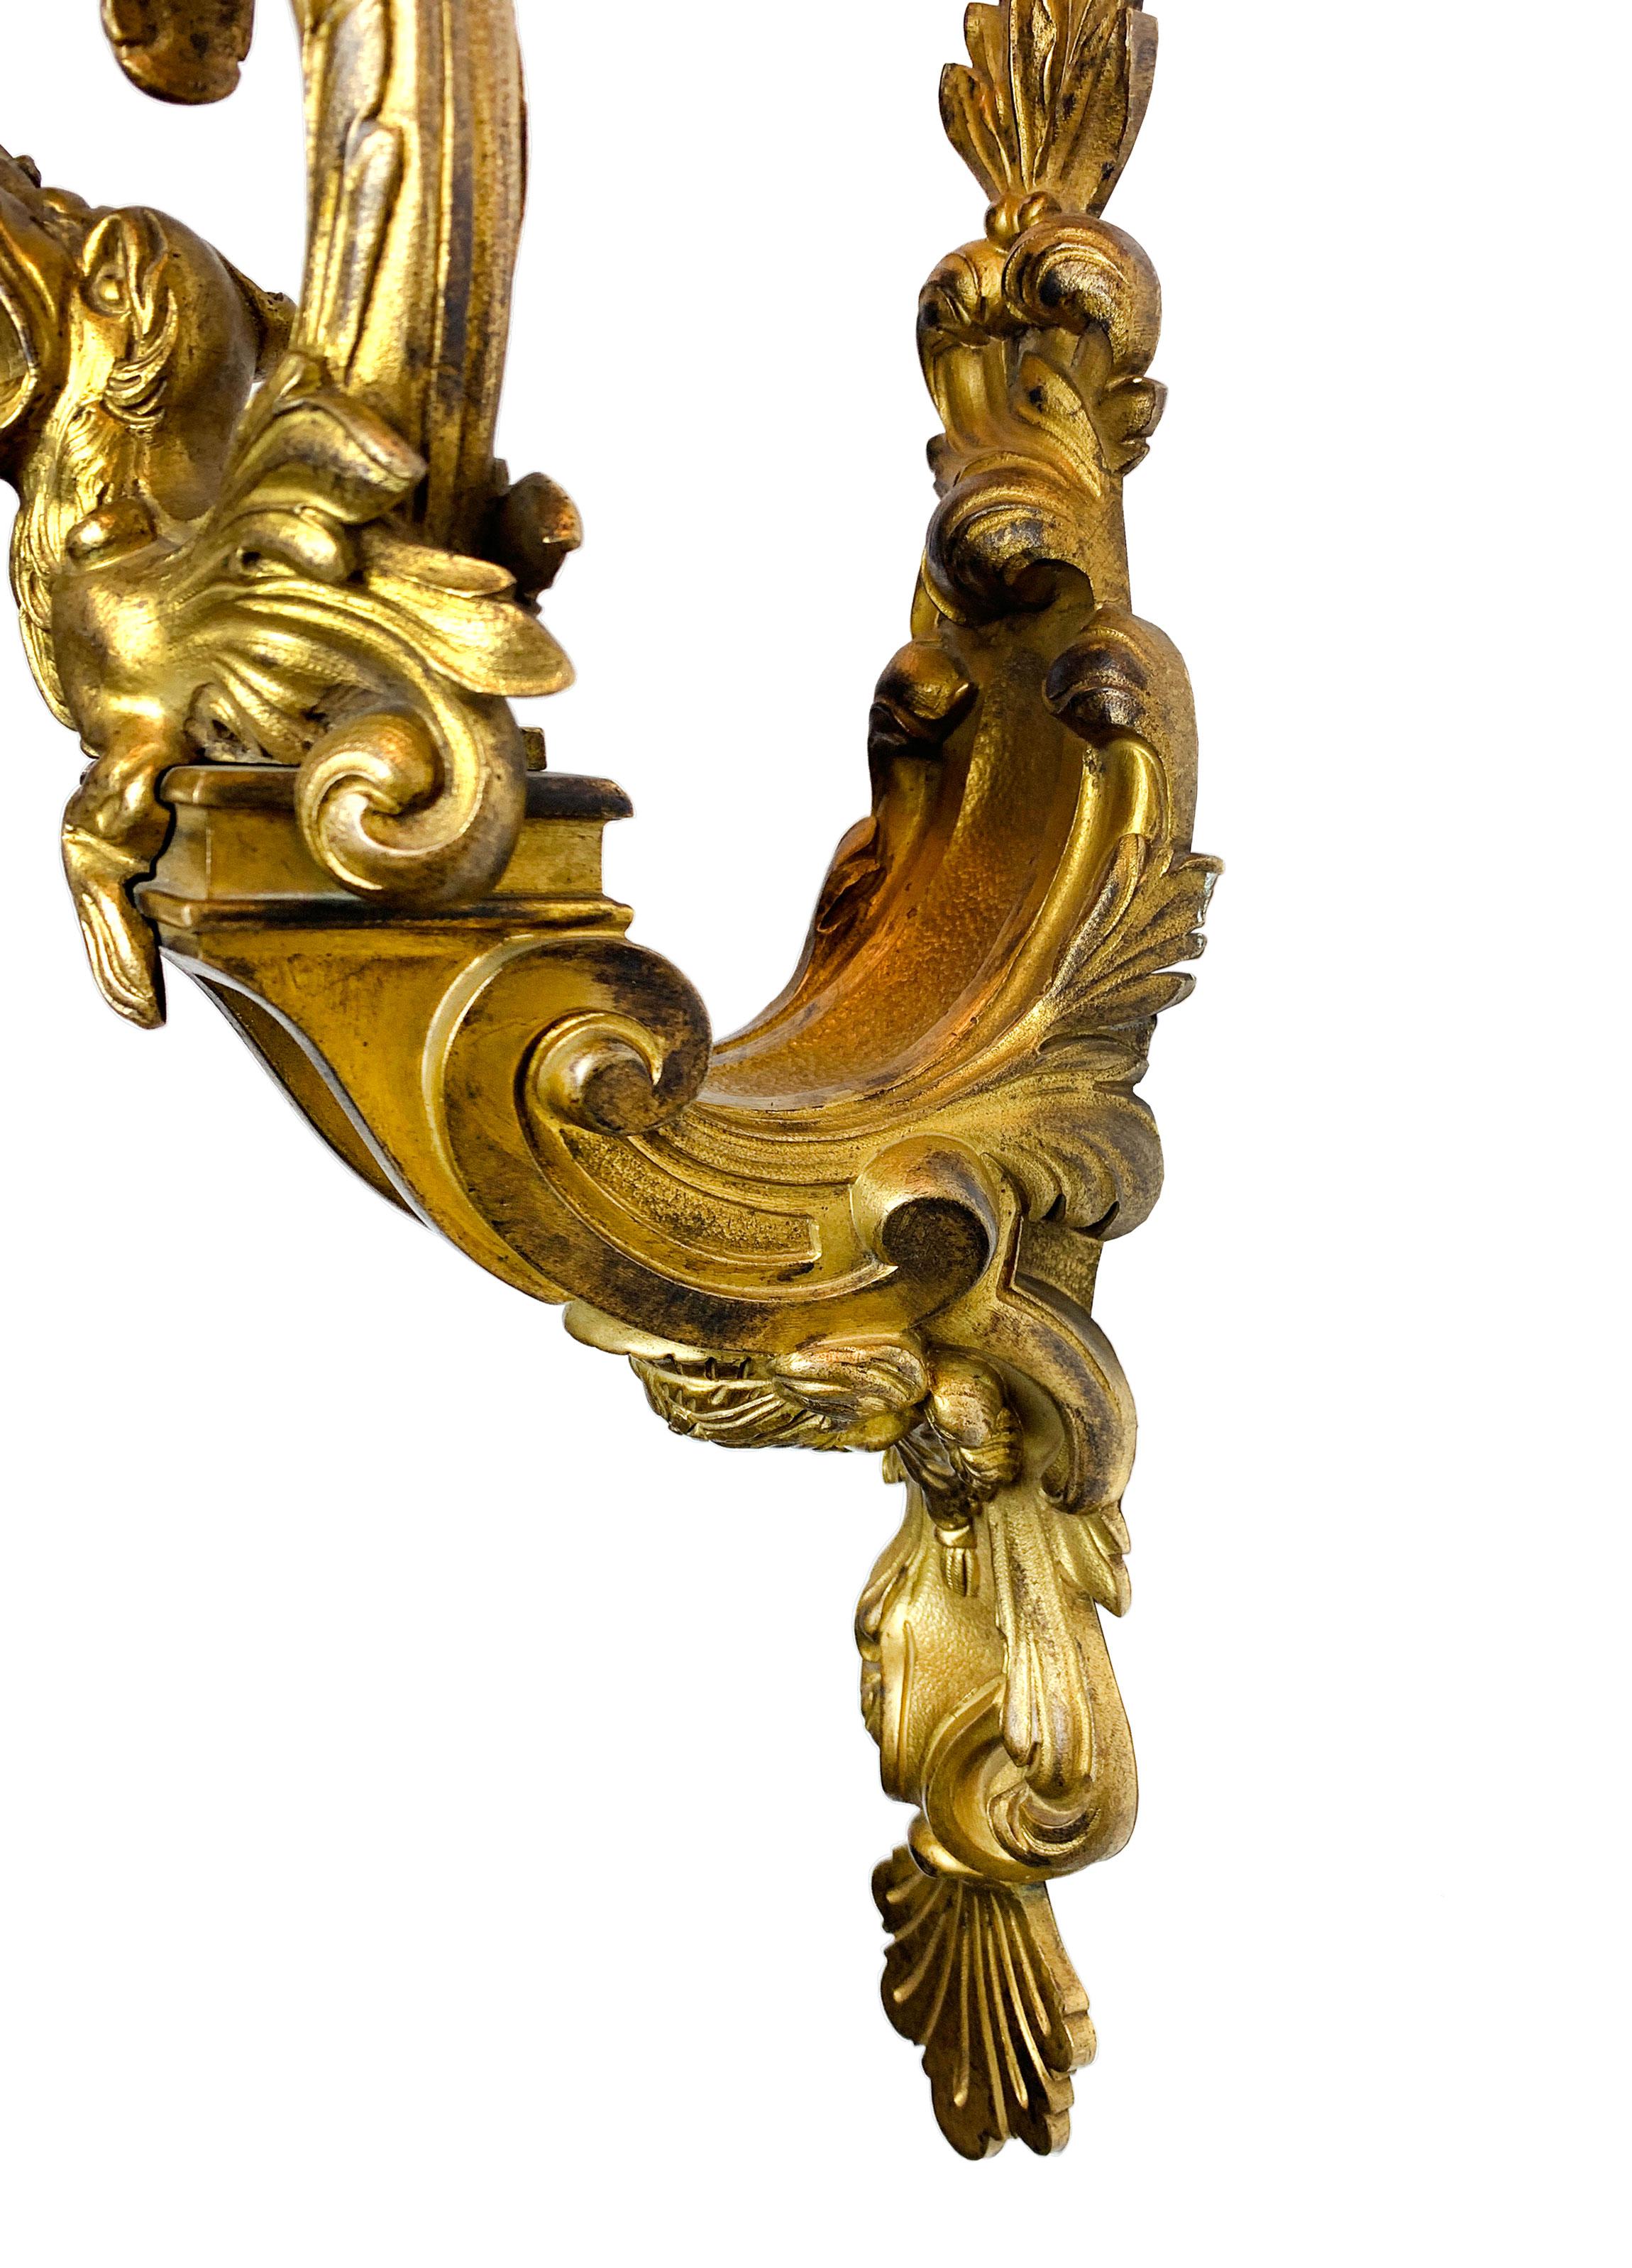 Pair of 19th Century Louis XV Style Ormolu Sconces After André-Charles Boulle For Sale 7